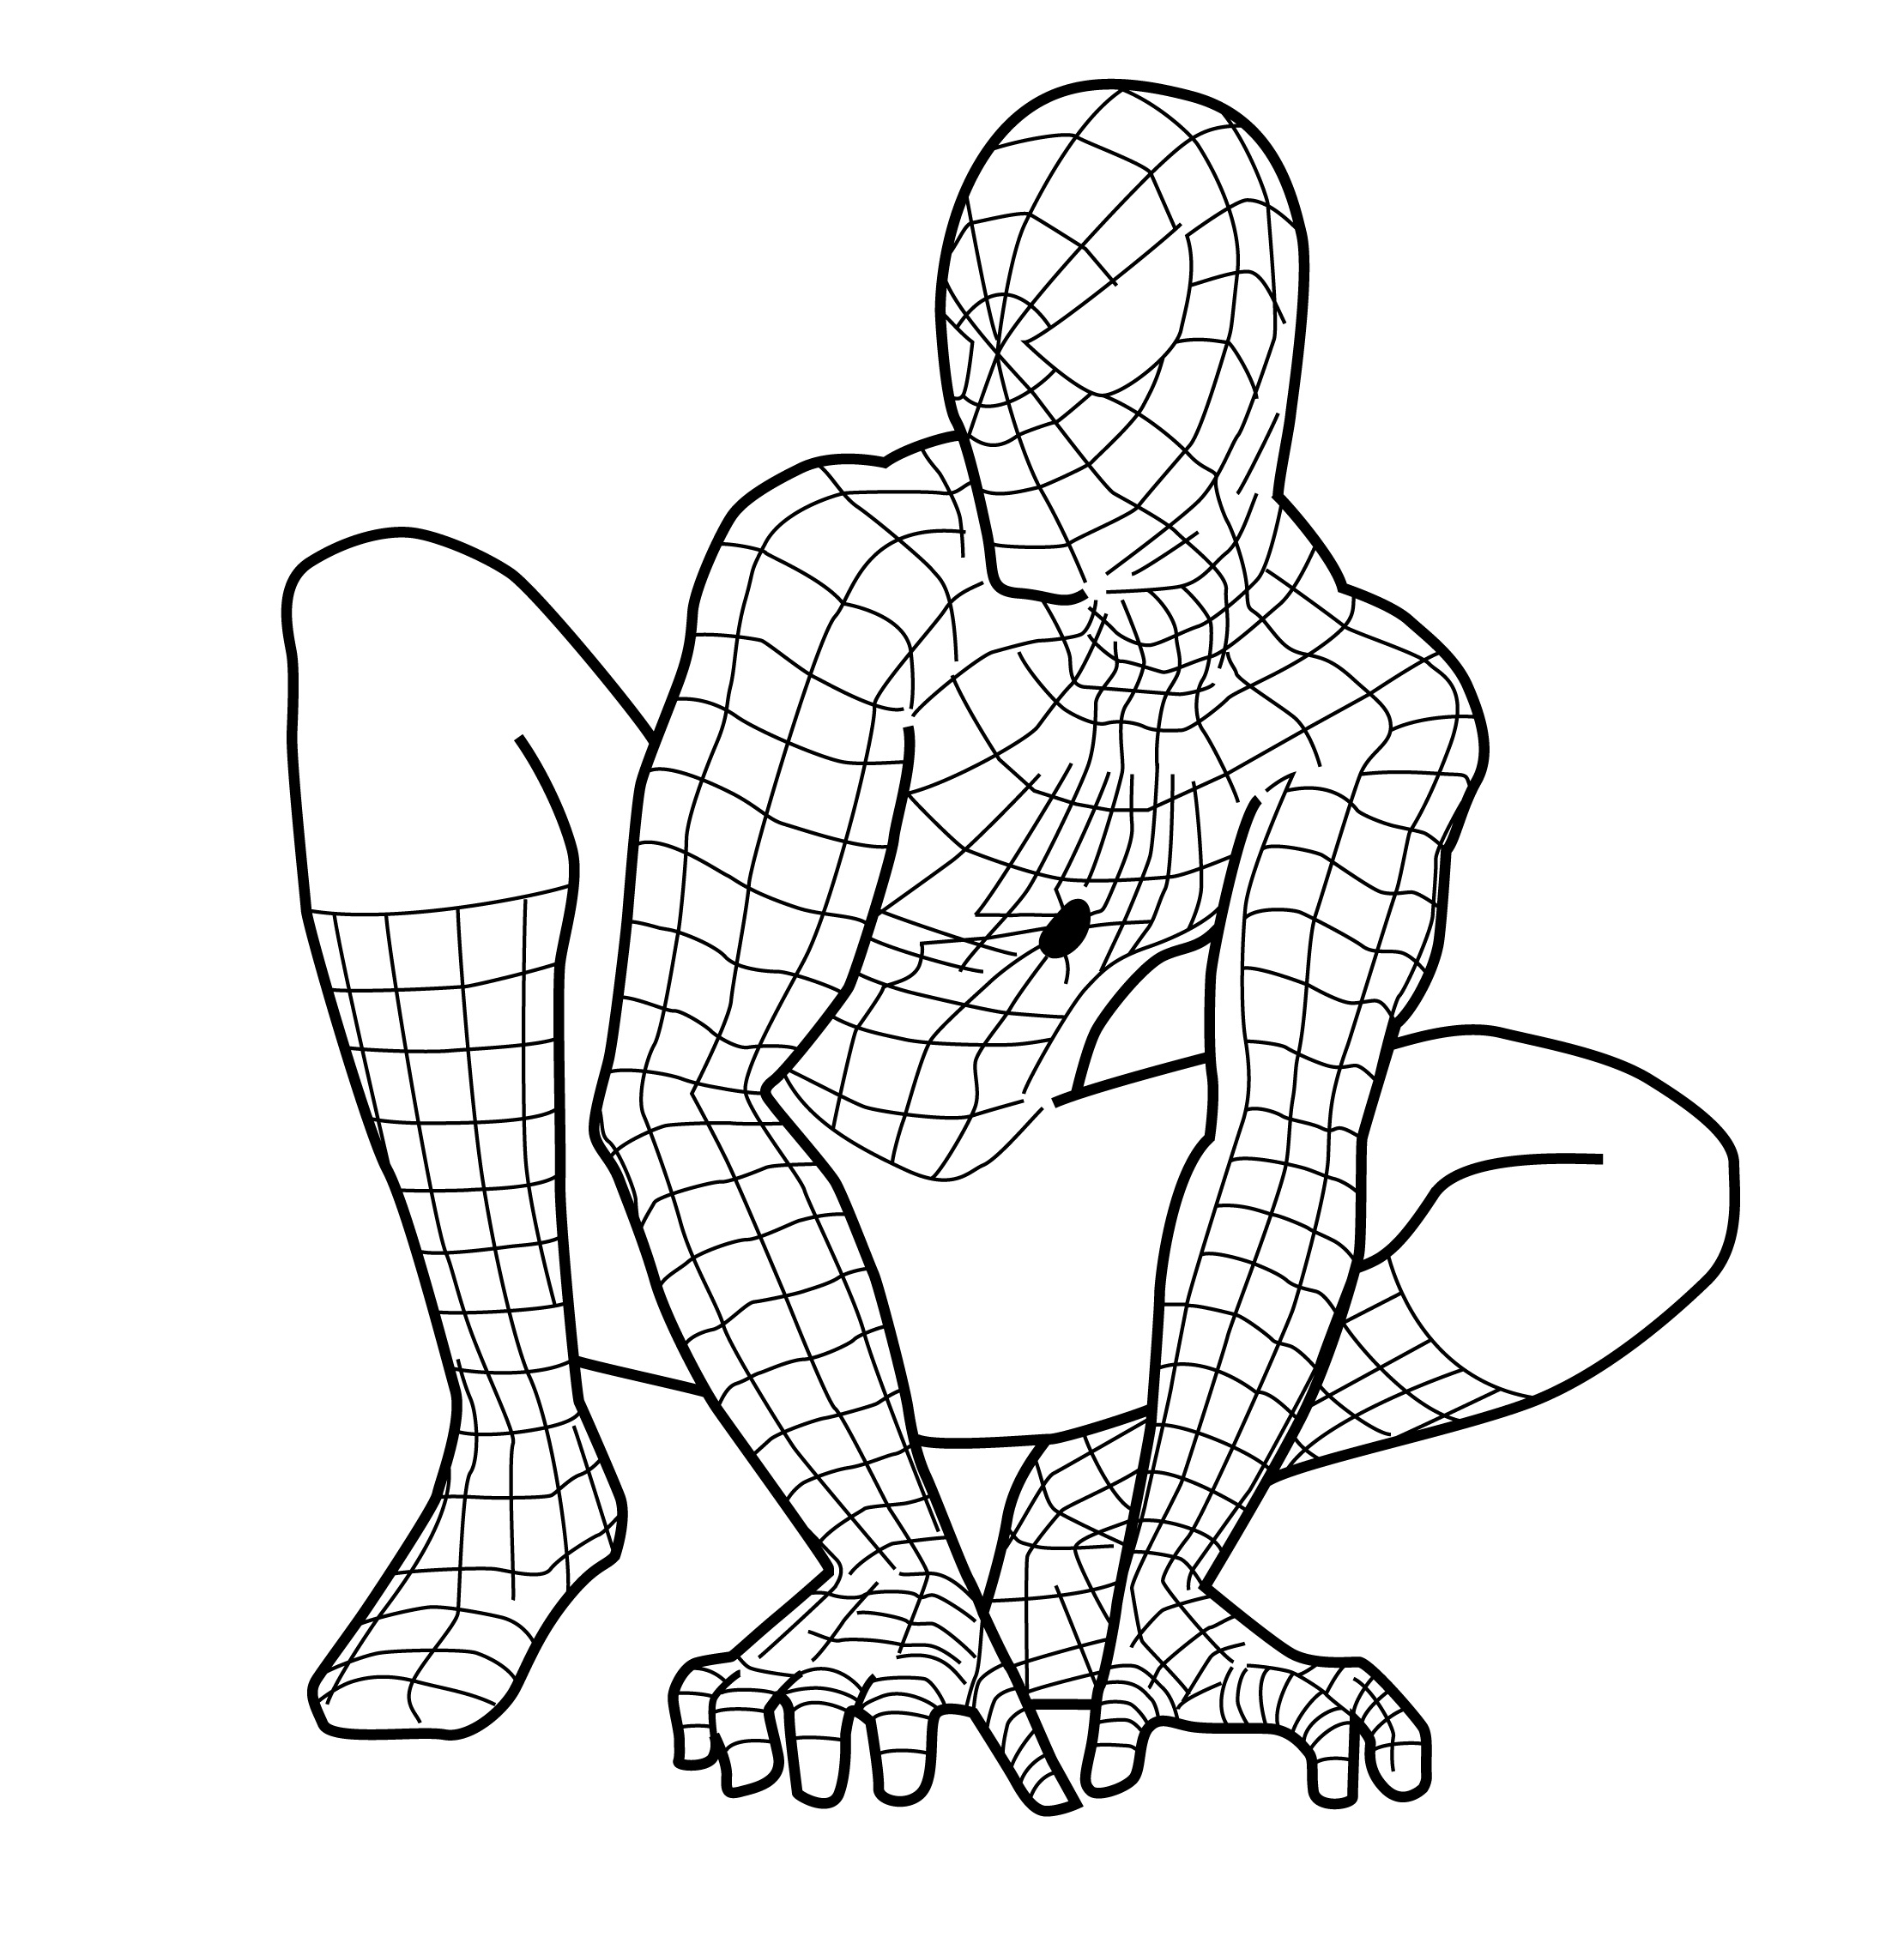 The Amazing Spiderman Coloring Pages at GetDrawings | Free ...